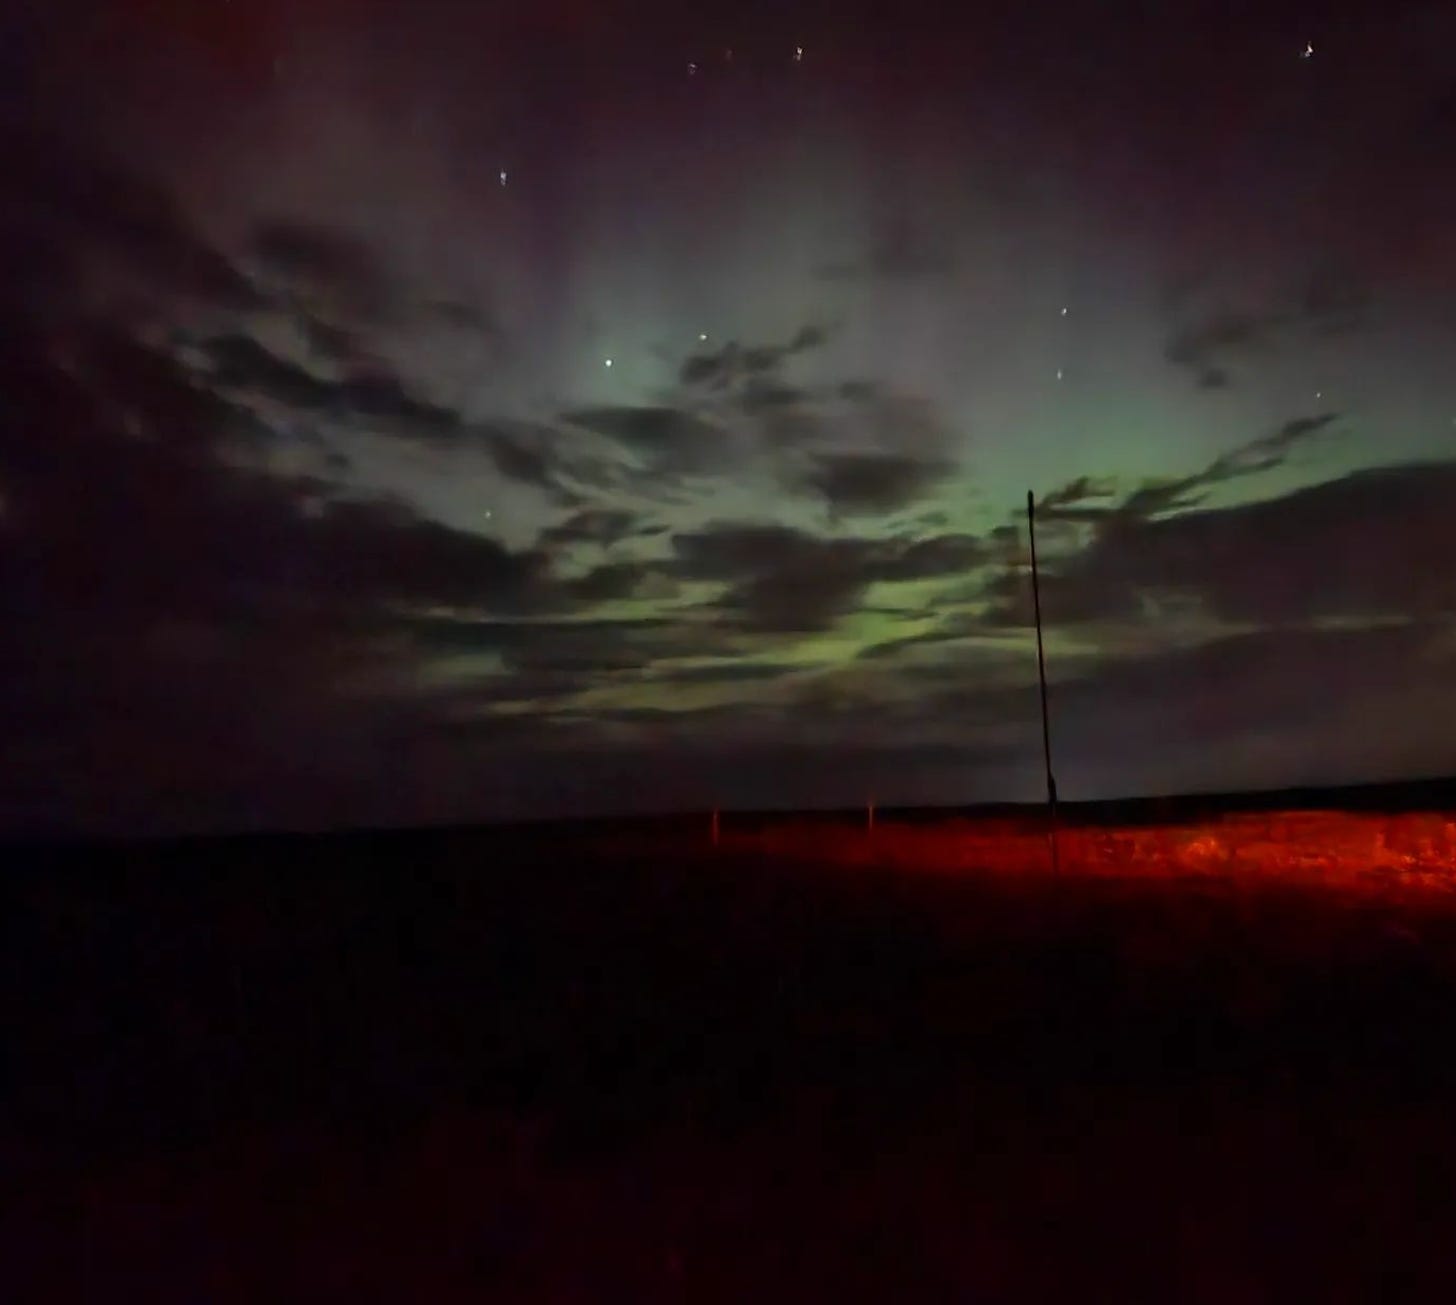 View of northern lights, faint, and blocked by clouds, over a field